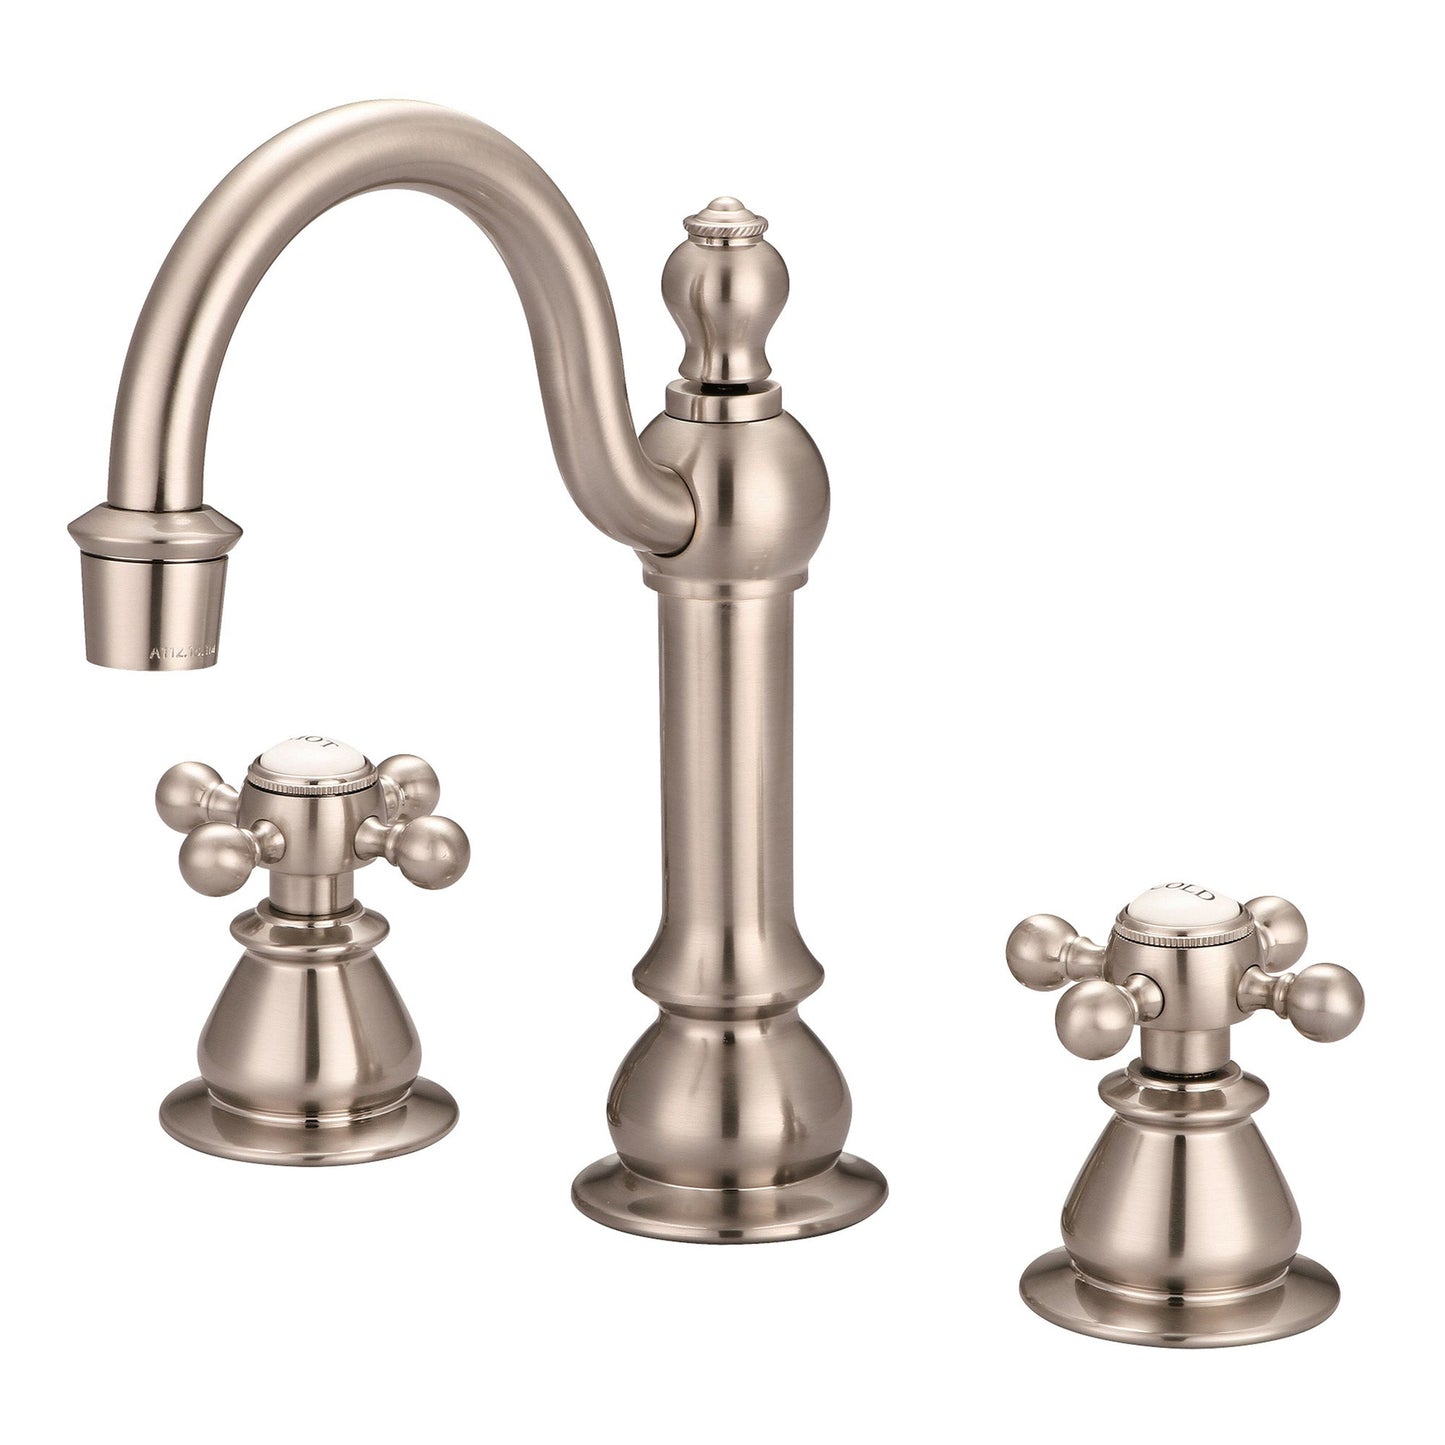 Water Creation American 20th Century Classic Widespread Lavatory F2-0012 8" Grey Solid Brass Faucet With Pop-Up Drain And Metal Lever Handles, Hot And Cold Labels Included